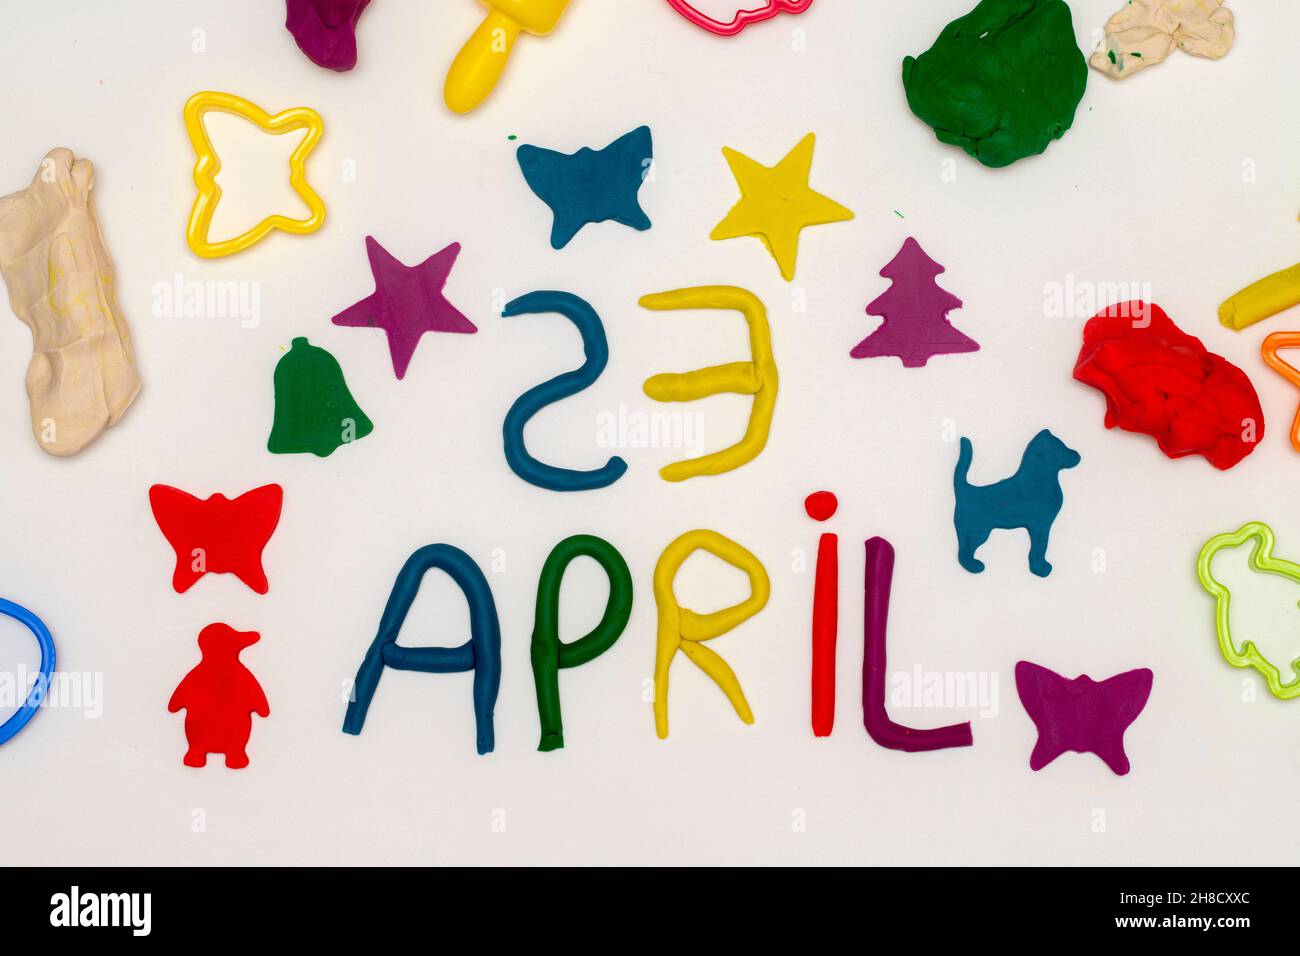 23 April inscription and figures written with dough on a white background. 23 april world children's day Stock Photo